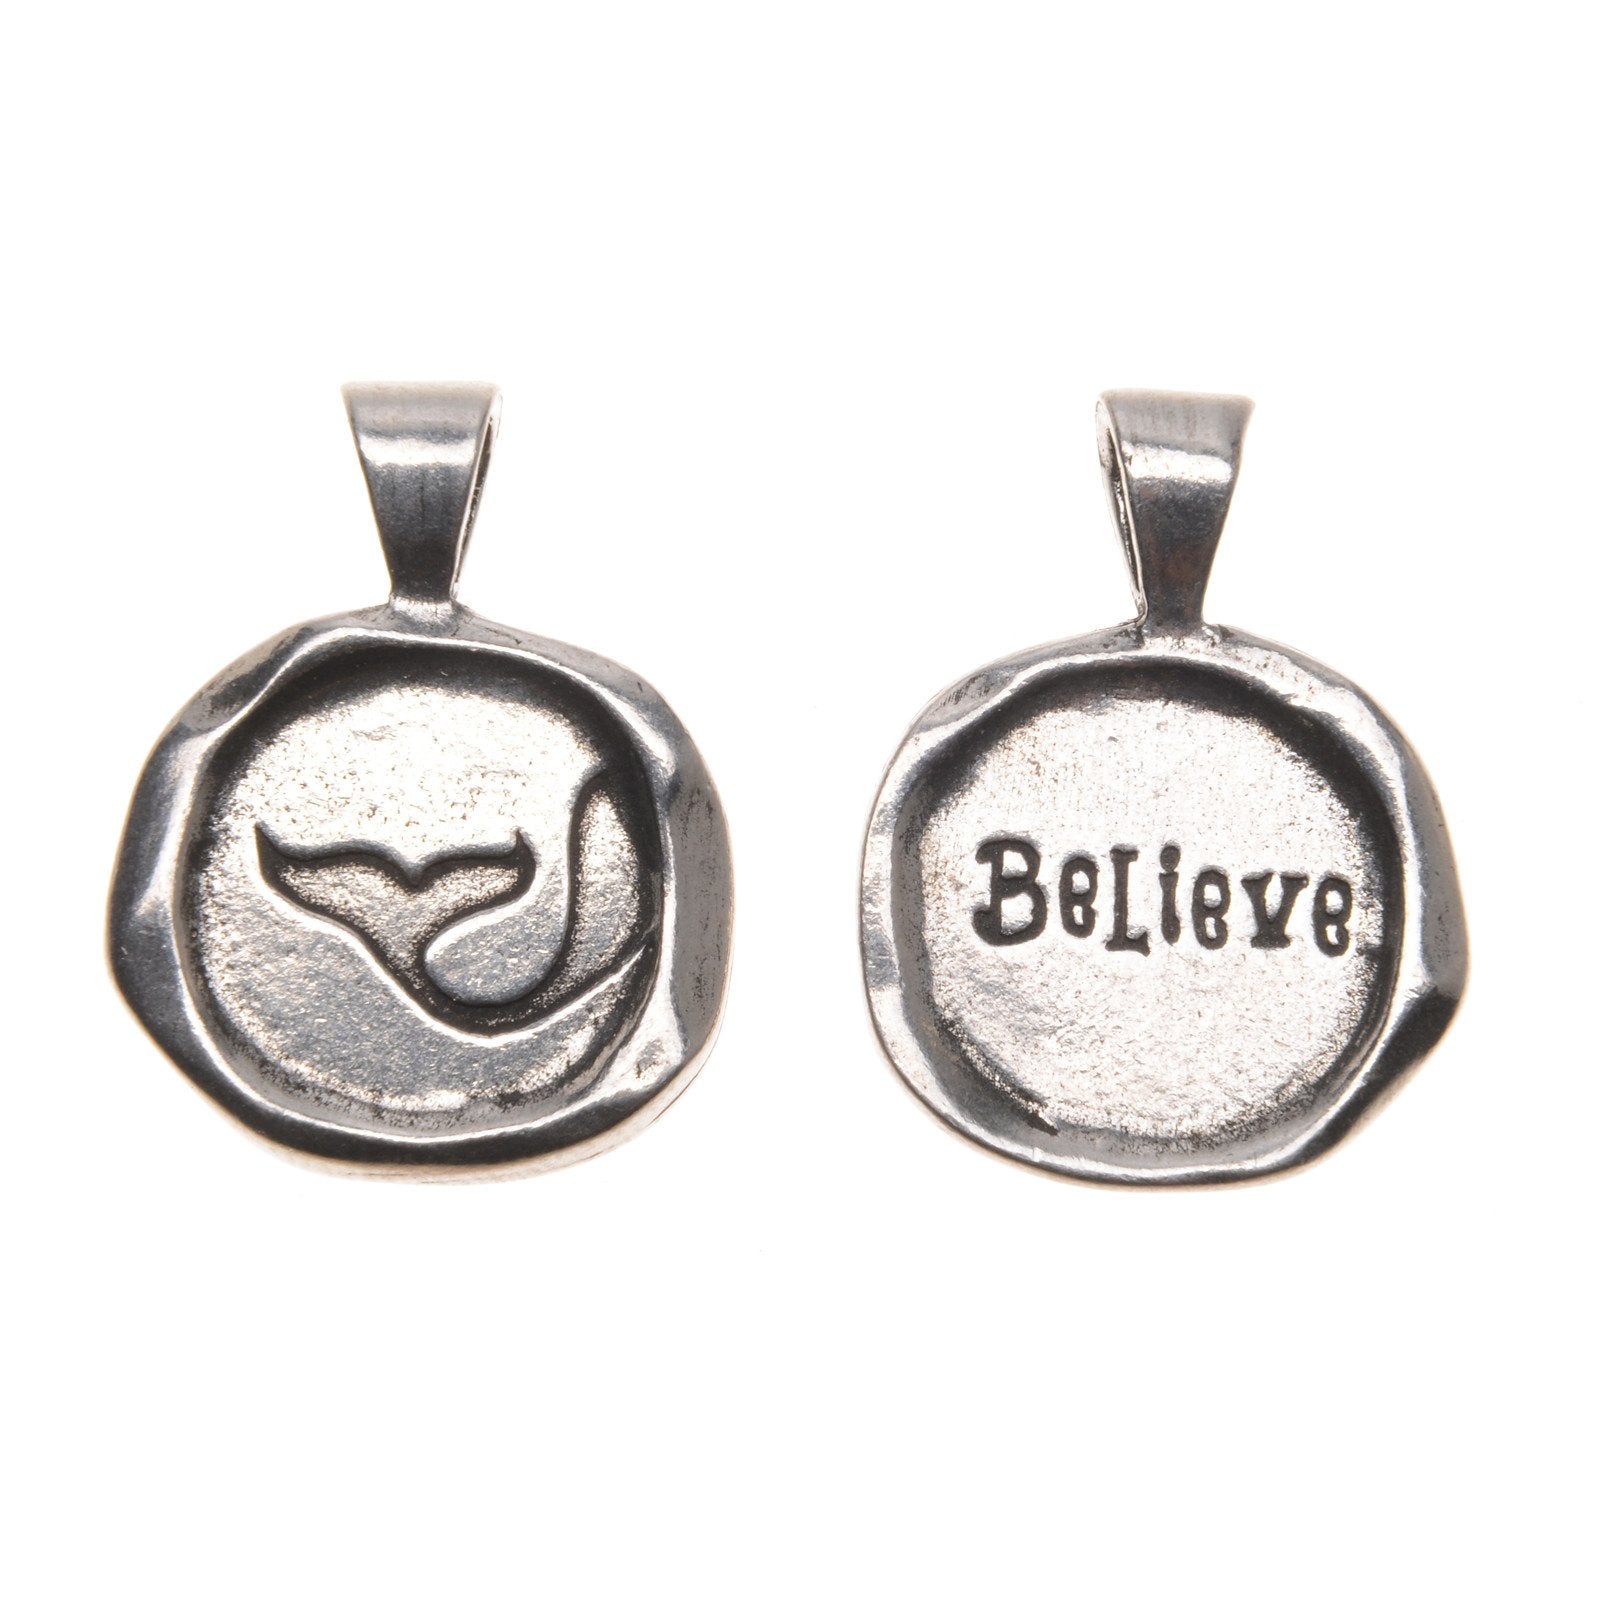 Believe Wax Seal front and back